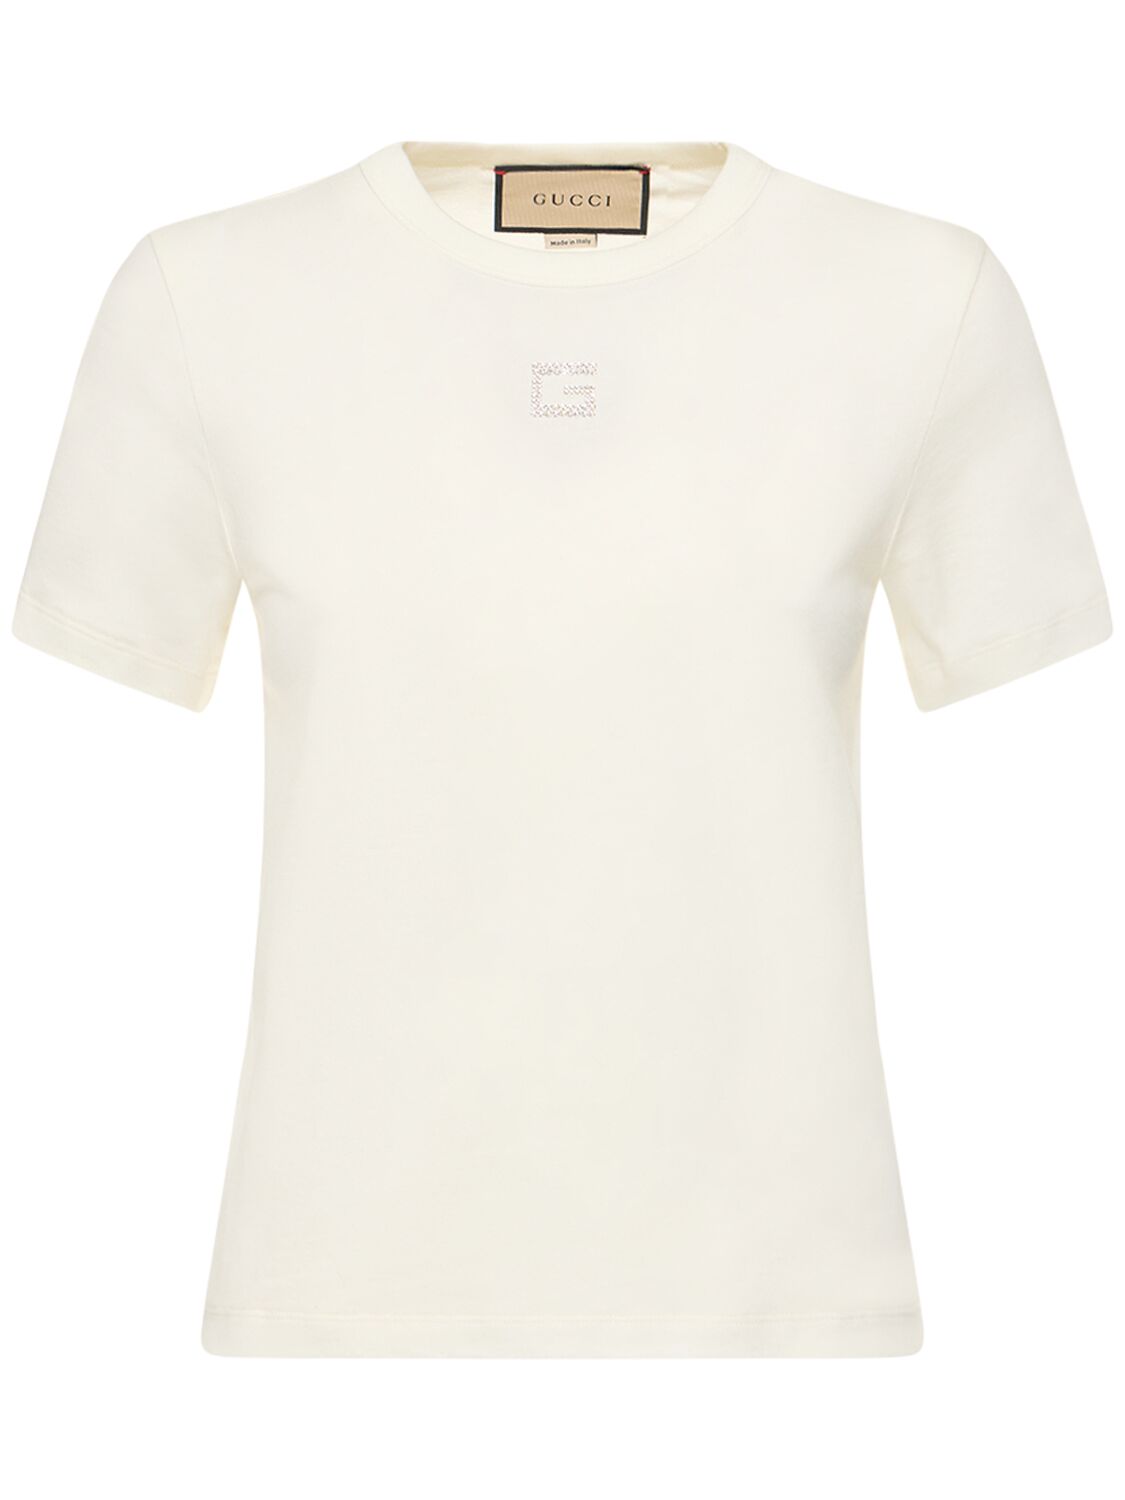 Image of Cotton Jersey T-shirt W/ Embroidery